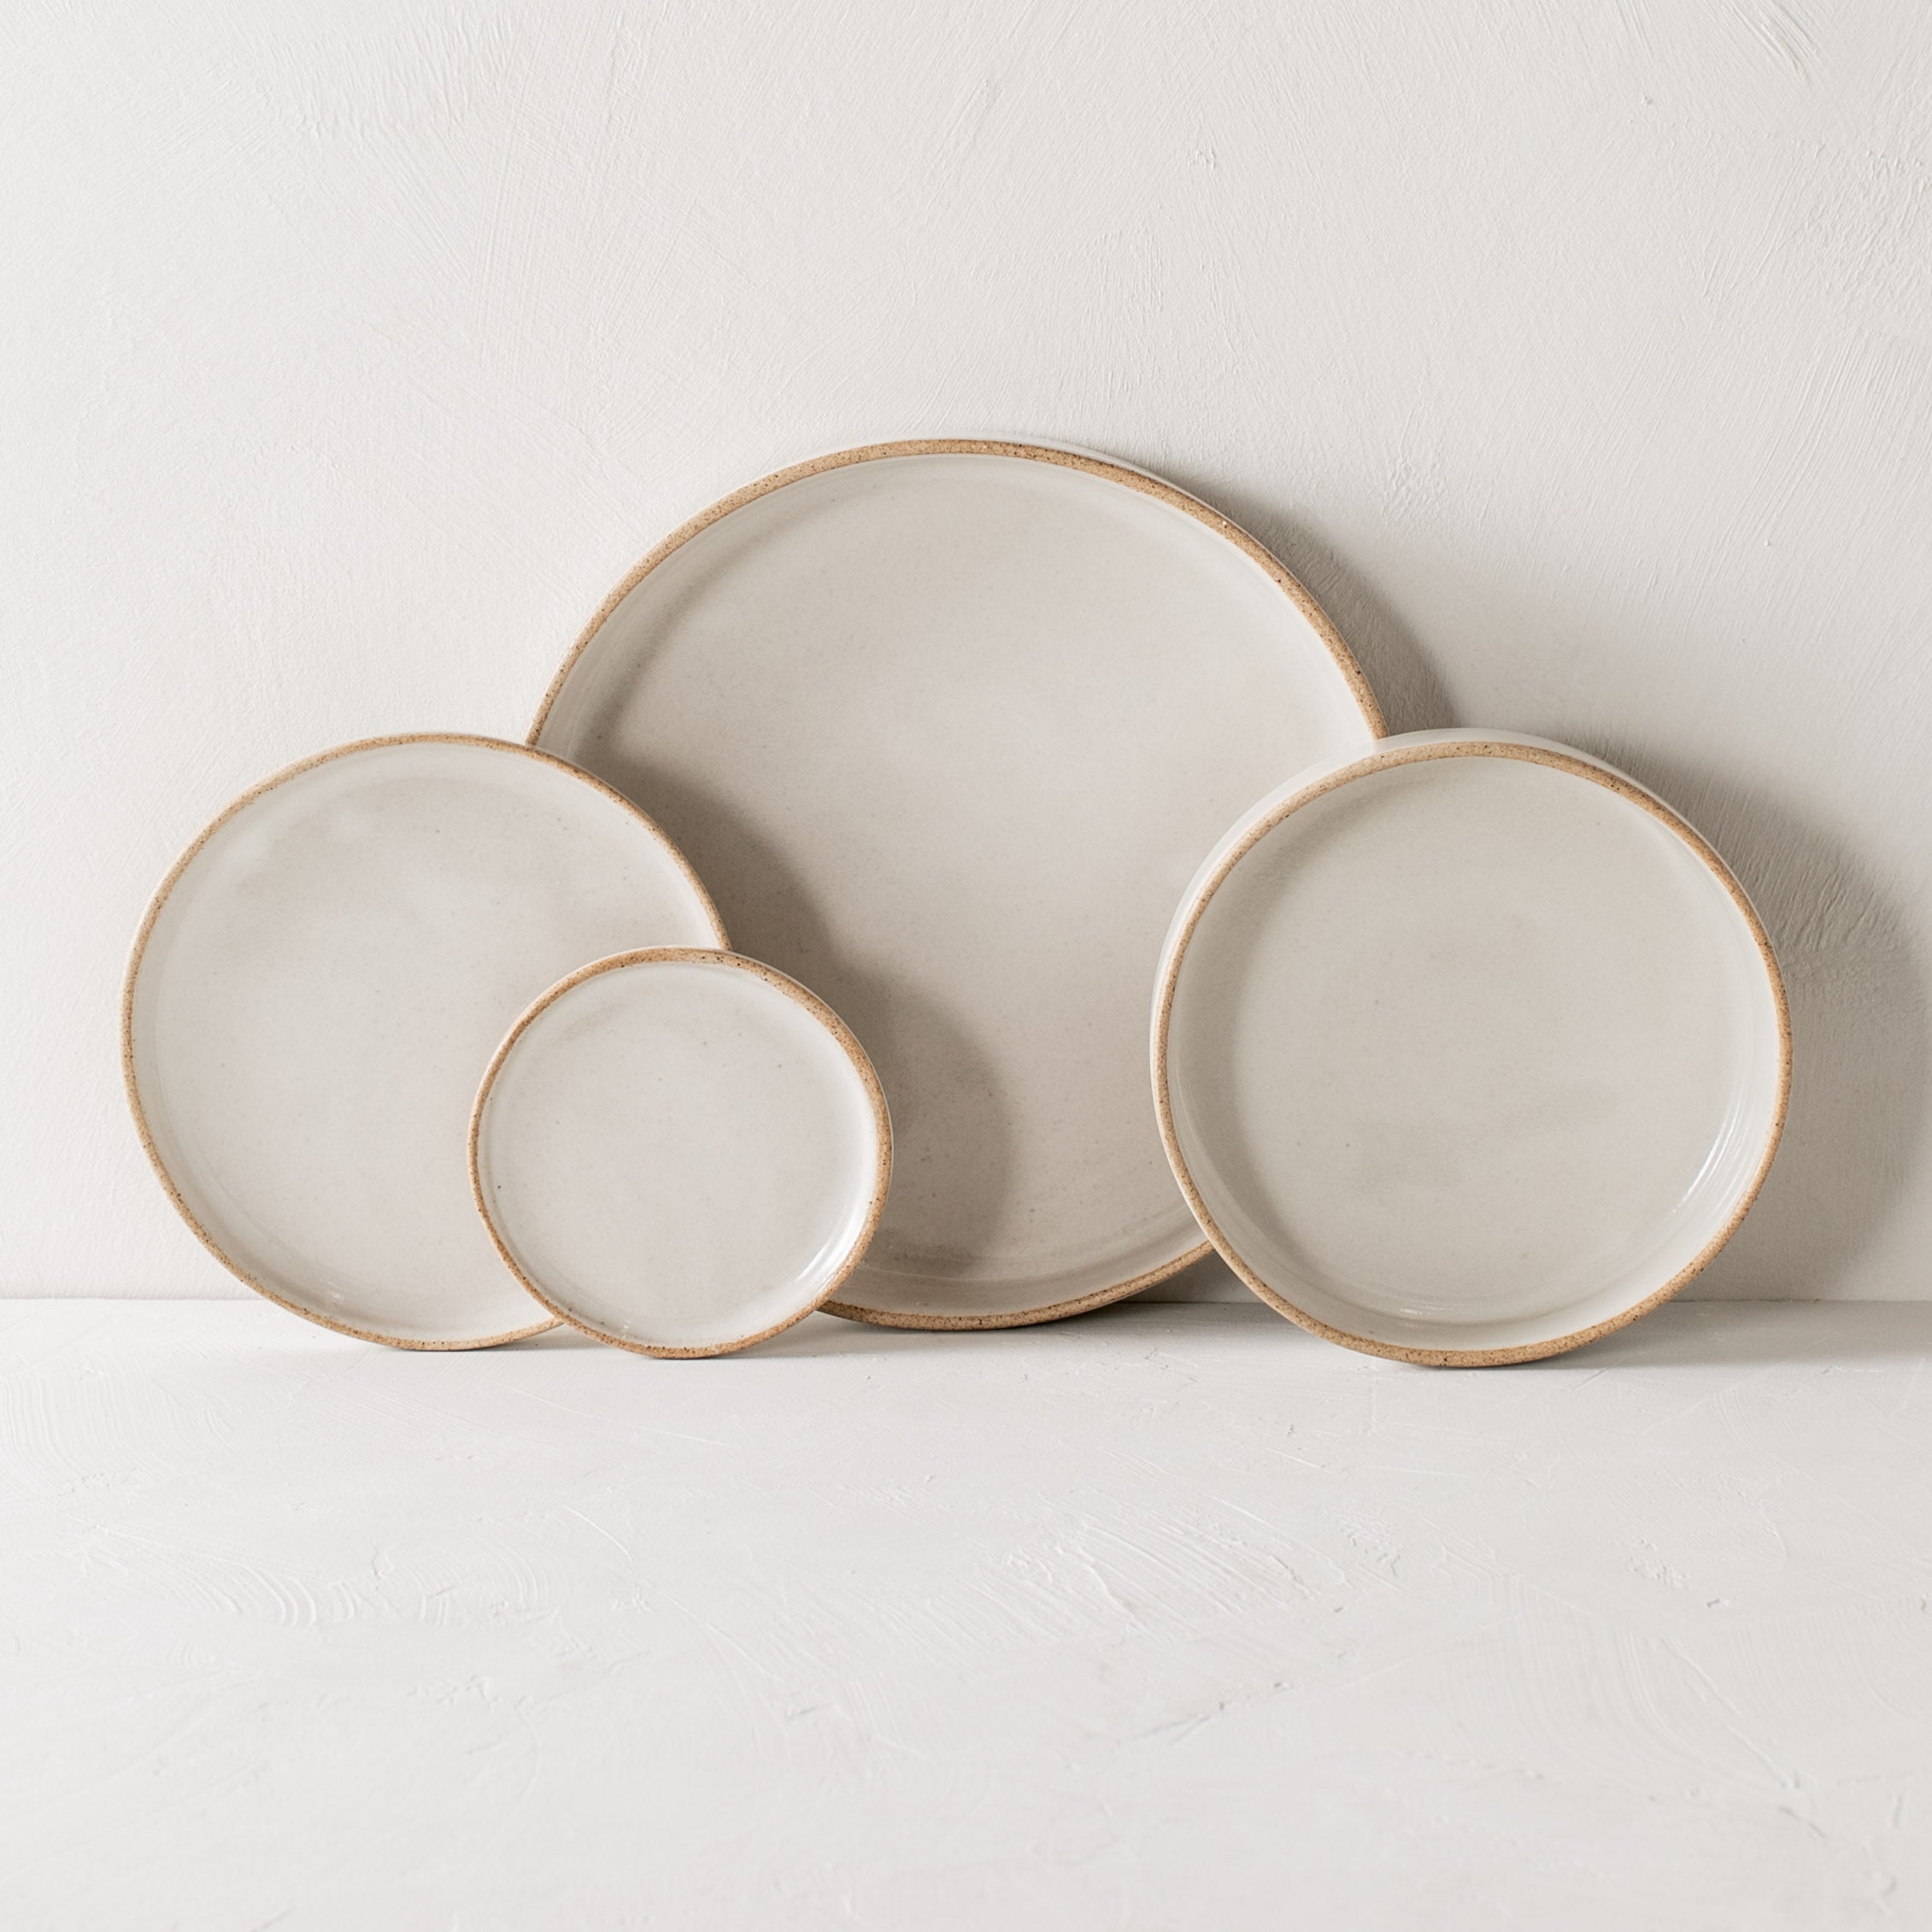 Dish set, leaning against lime wash white backdrop wall and white textured tabletop. From left to right; minimal side 6 inch dish, 4 inch side dish, dinner dish, salad dish. Dishes have a lifted edges creating a deep dish, ceramic white glaze with exposed stoneware rims. Handmade ceramic deep dishes designed and sold by Convivial Production, Kansas City ceramics.  